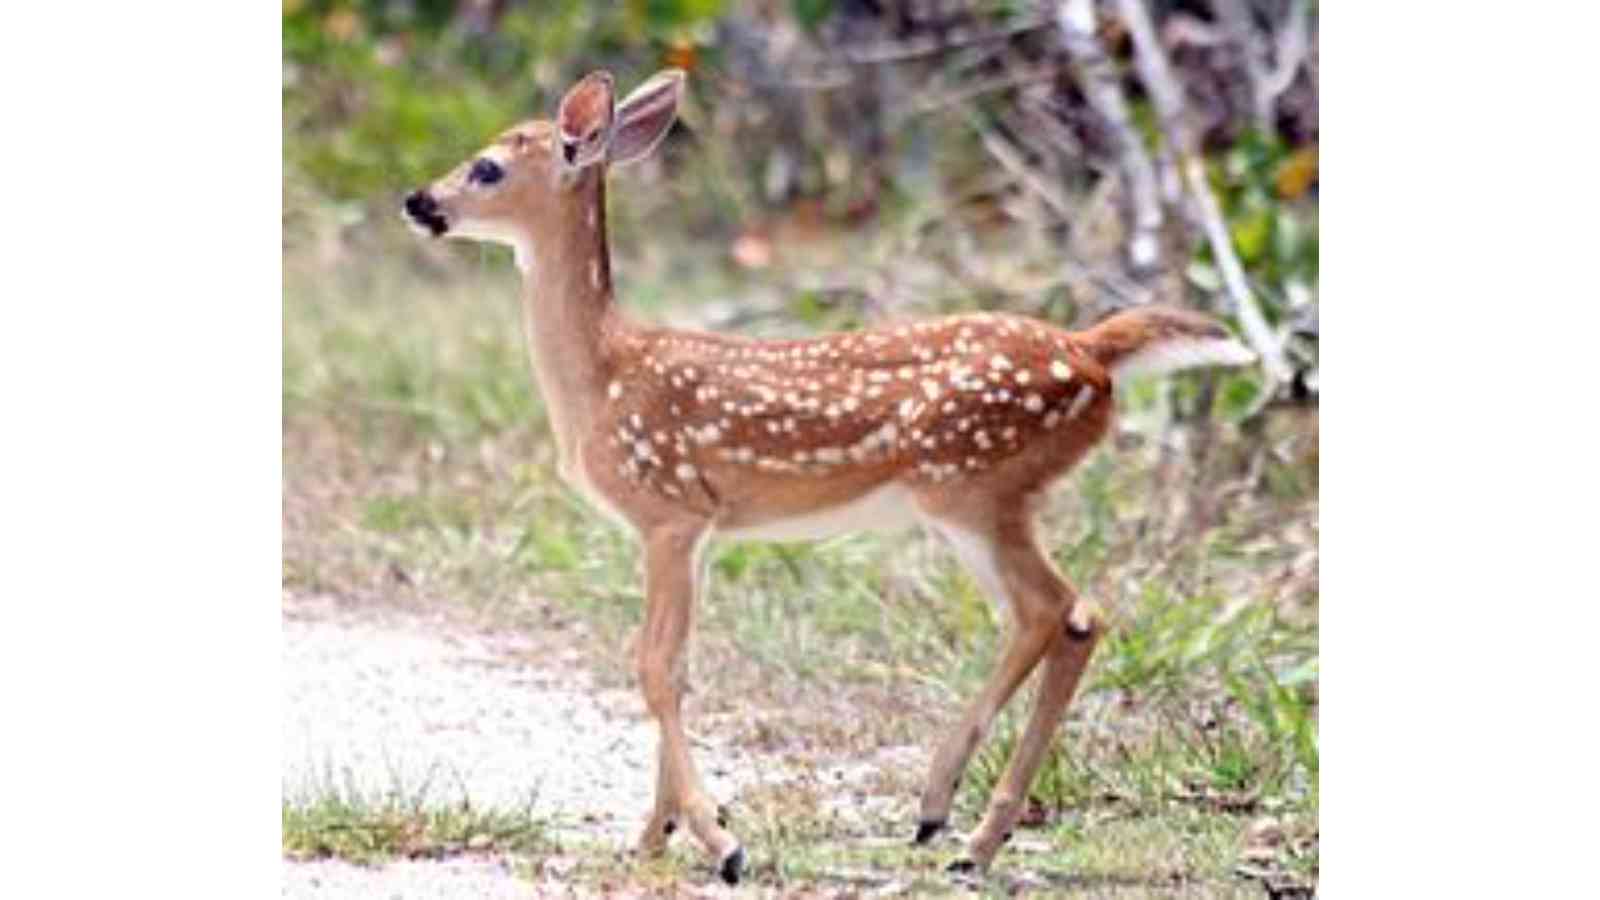 Key Deer Awareness Day 2023: Date, History, Facts about Deer